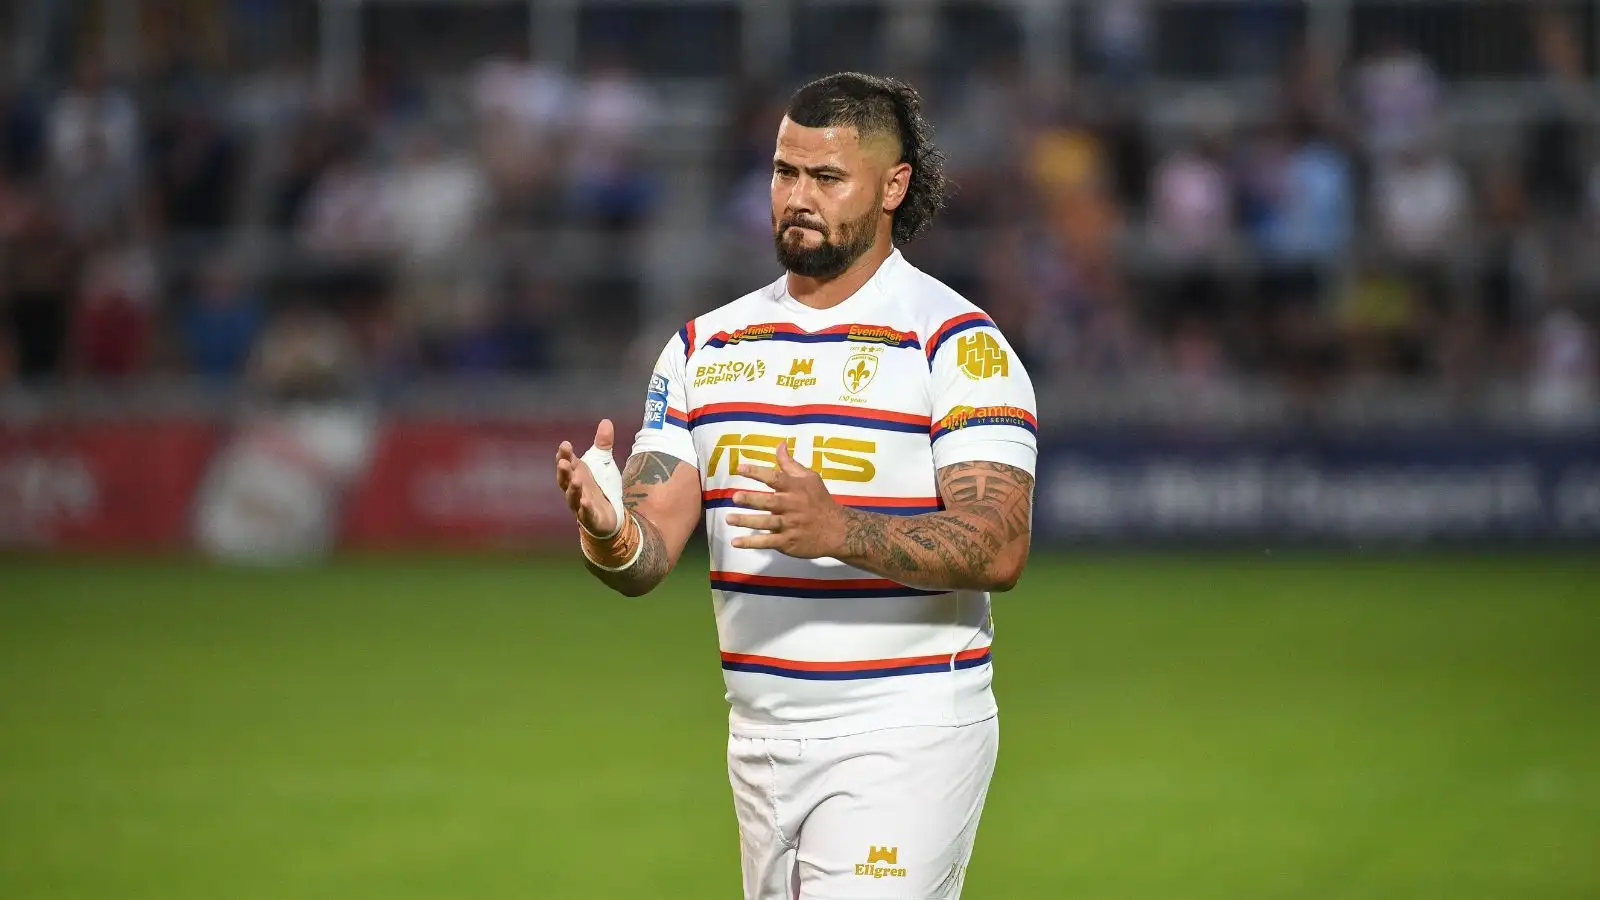 David Fifita retires a Wakefield Trinity legend following Belle Vue return: ‘It shows the mark of his character’